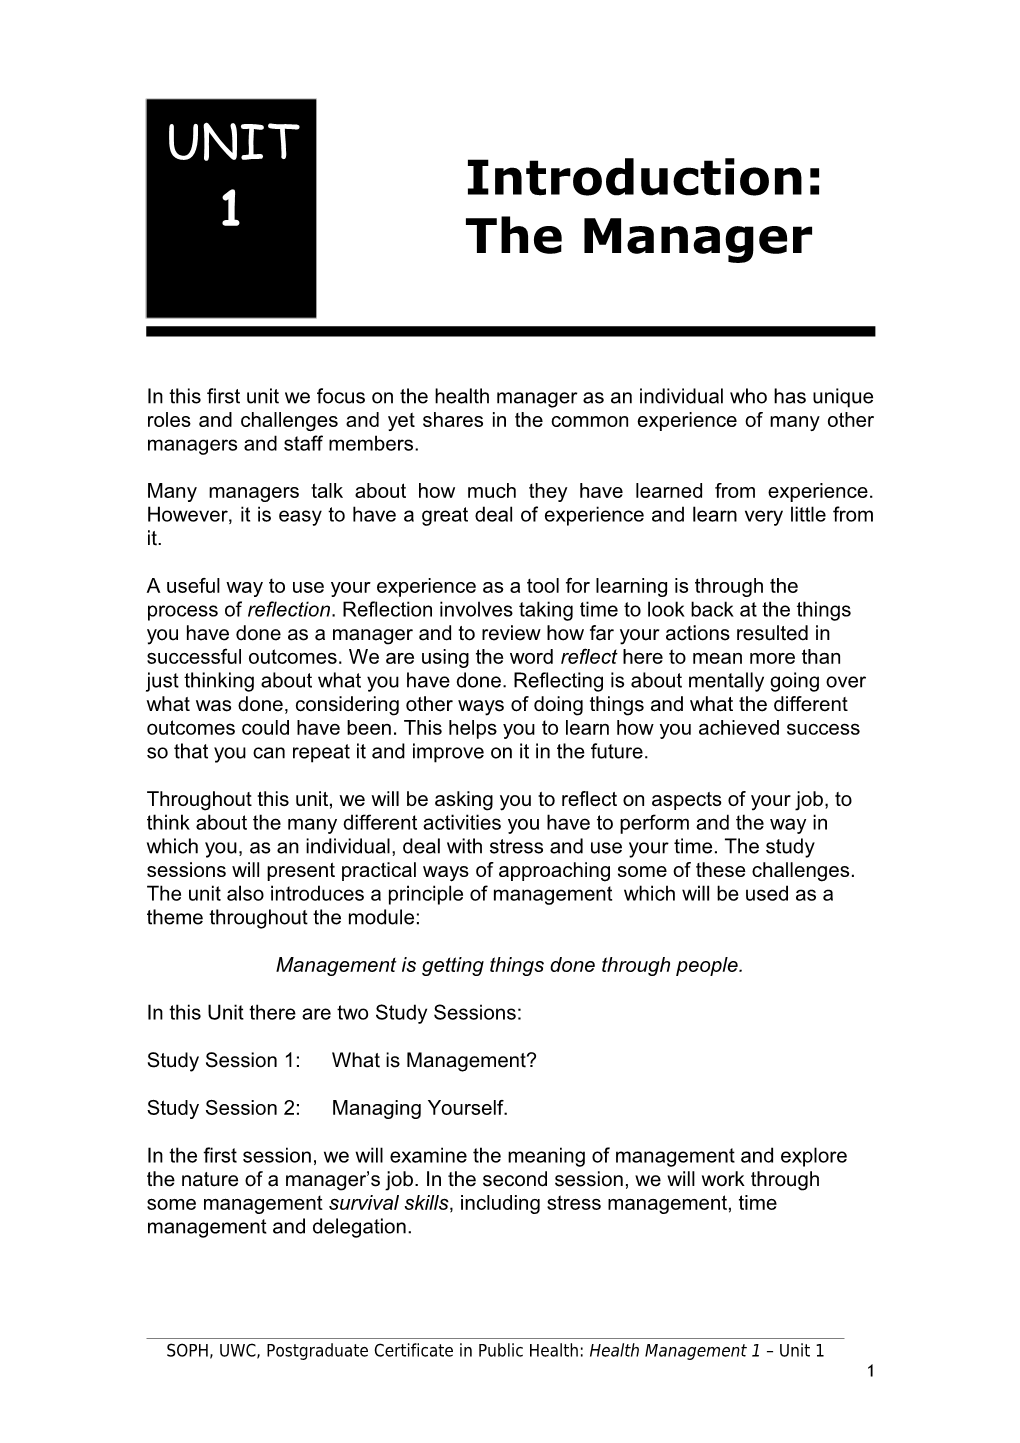 In This First Unit We Focus on the Health Manager As an Individual Who Has Unique Roles